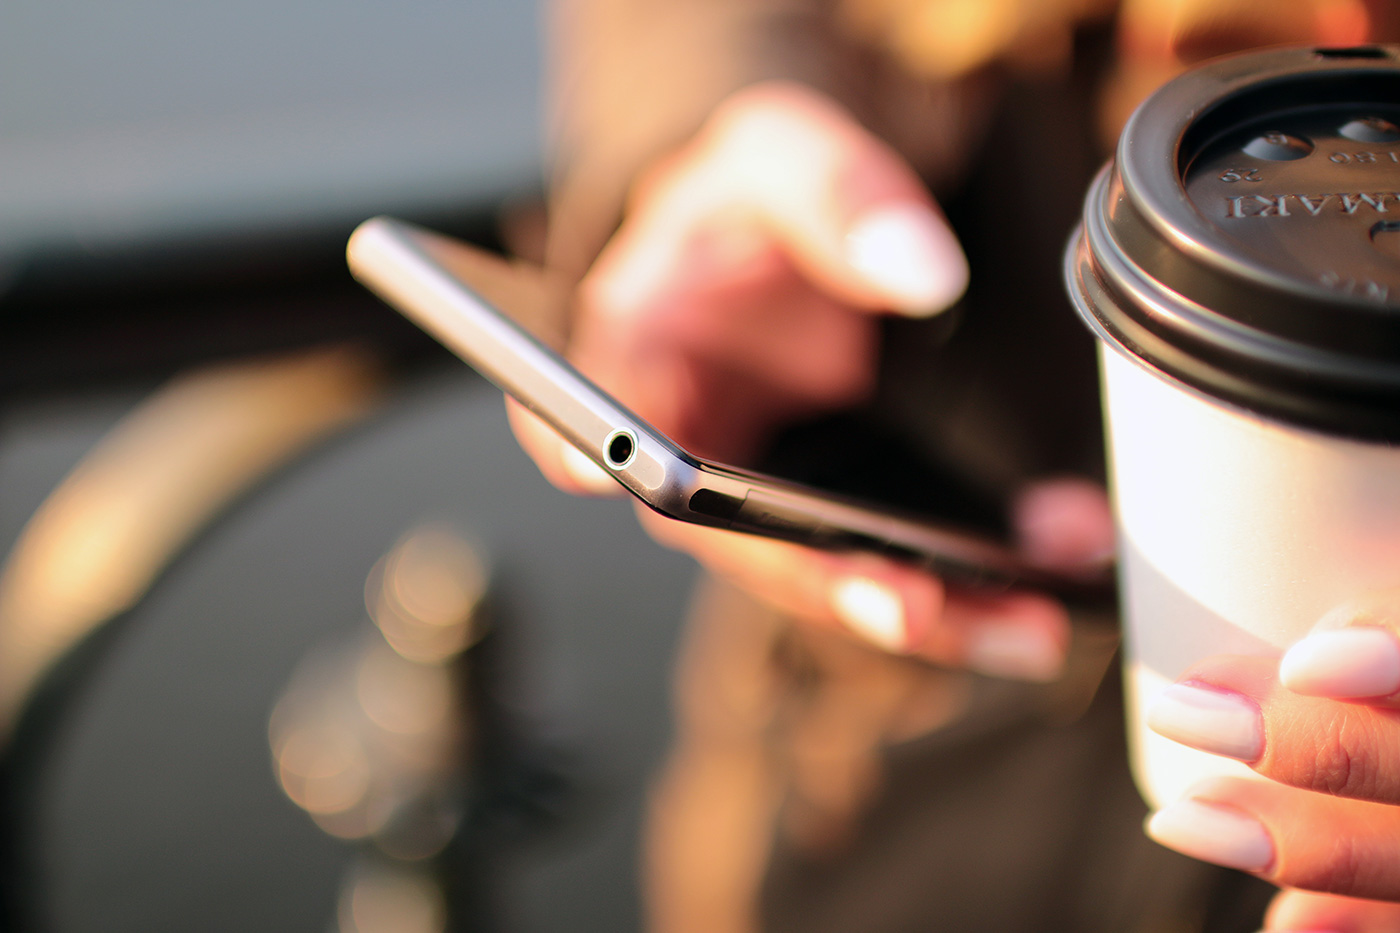 Hand holding phone and coffee. CONTACT US Join our mailing list, send us a question or feedback.